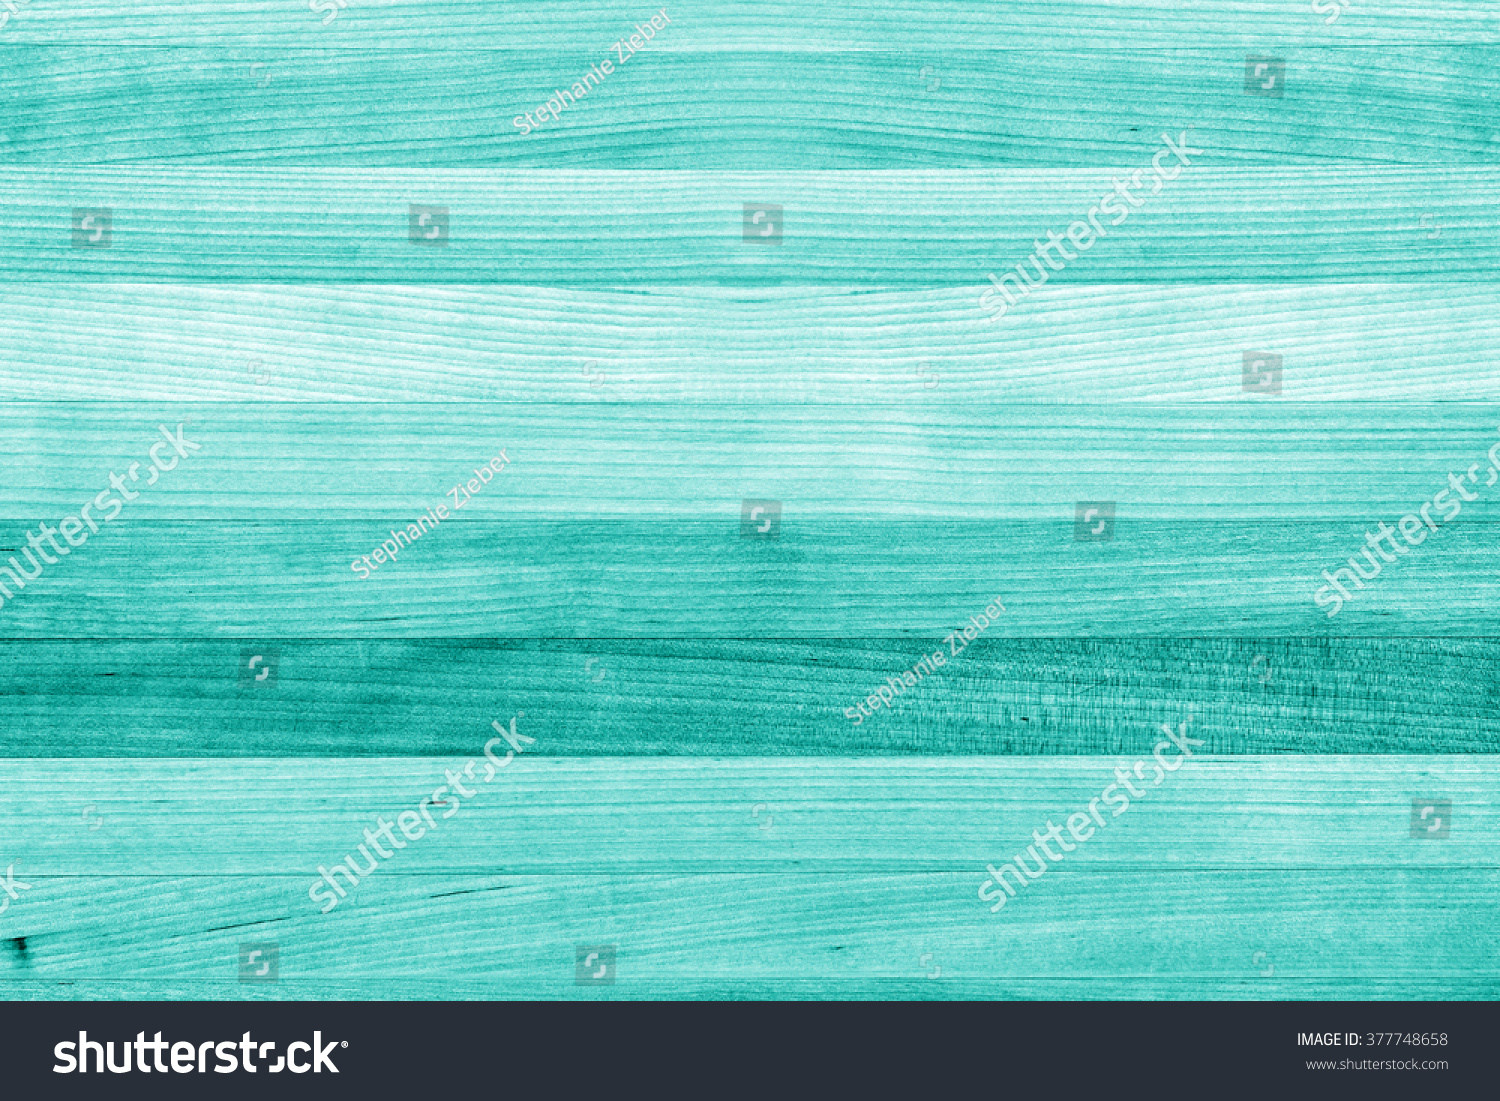 Teal or turquoise green painted wood background texture #377748658